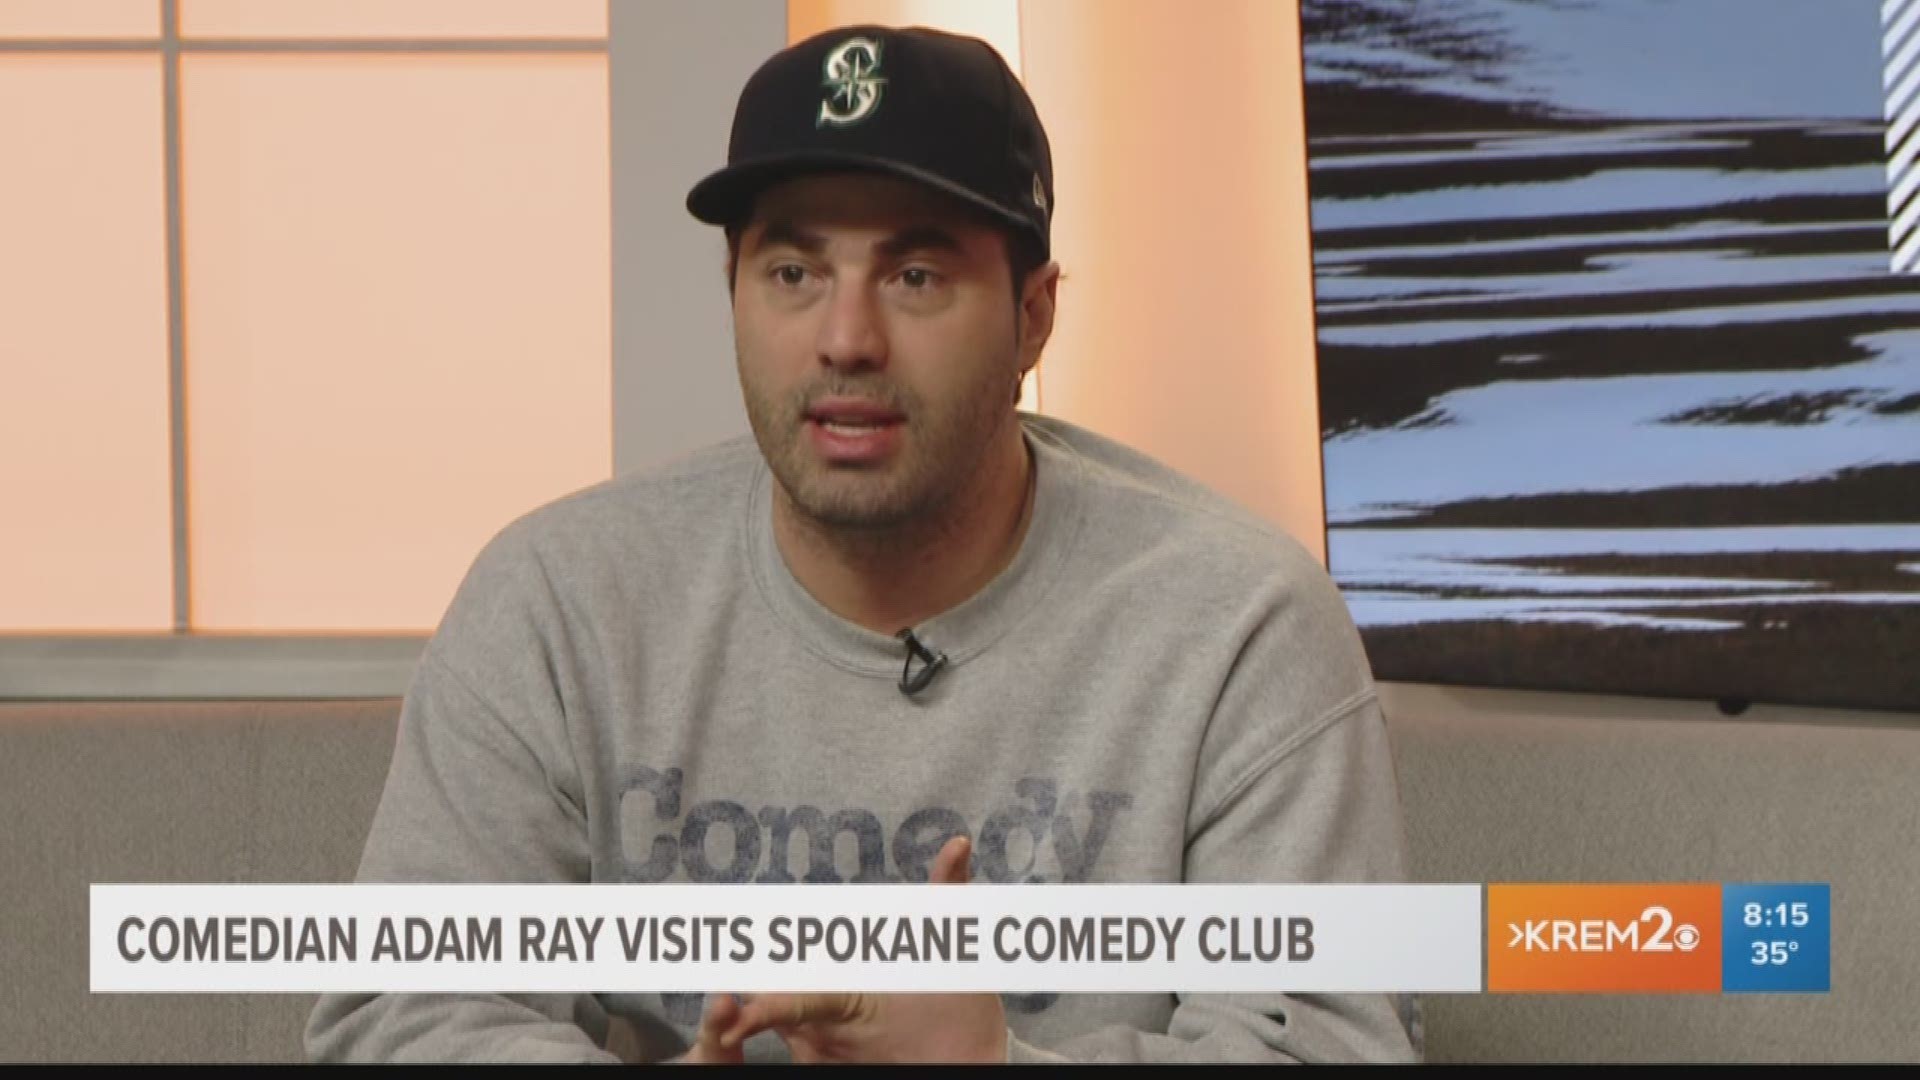 KREM's Brittany Bailey and Jen York chat with comedian Adam Ray about his upcoming shows at Spokane Comedy Club.